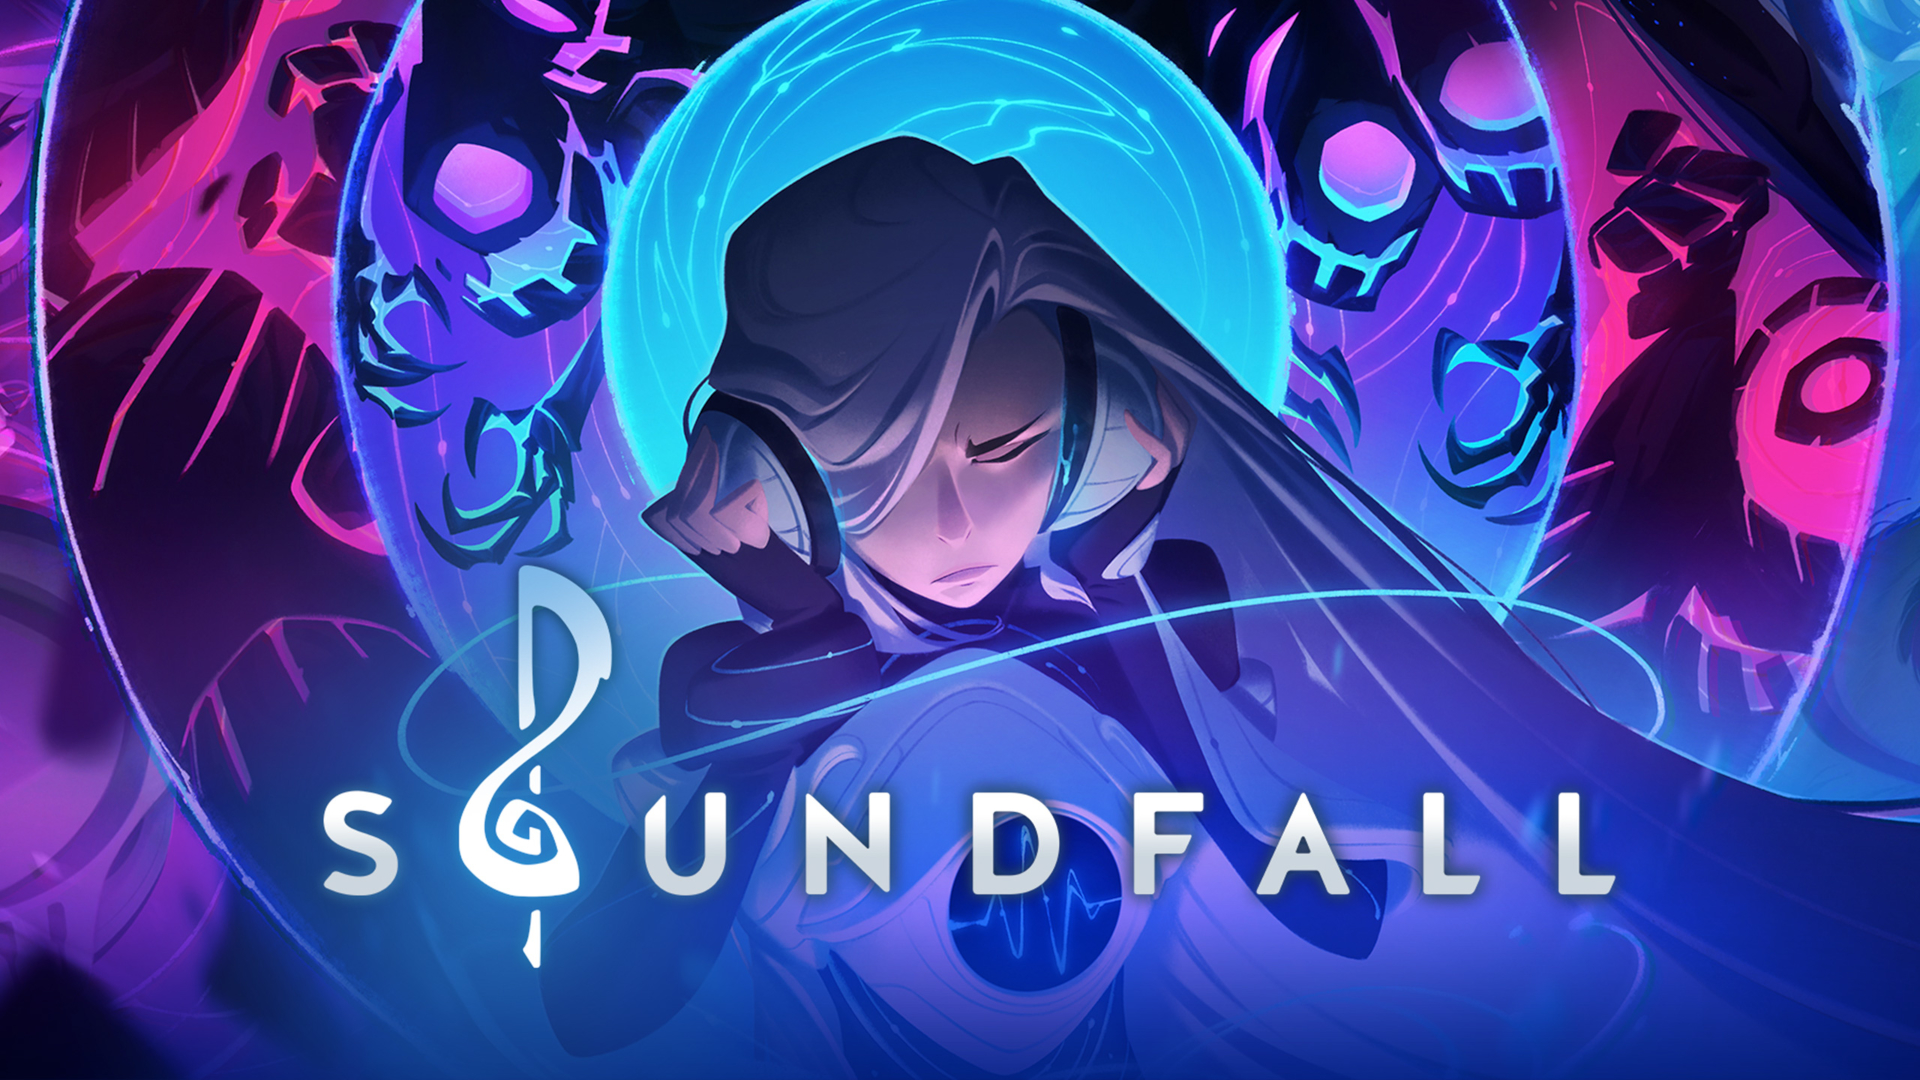 Video Game Soundfall HD Wallpaper | Background Image